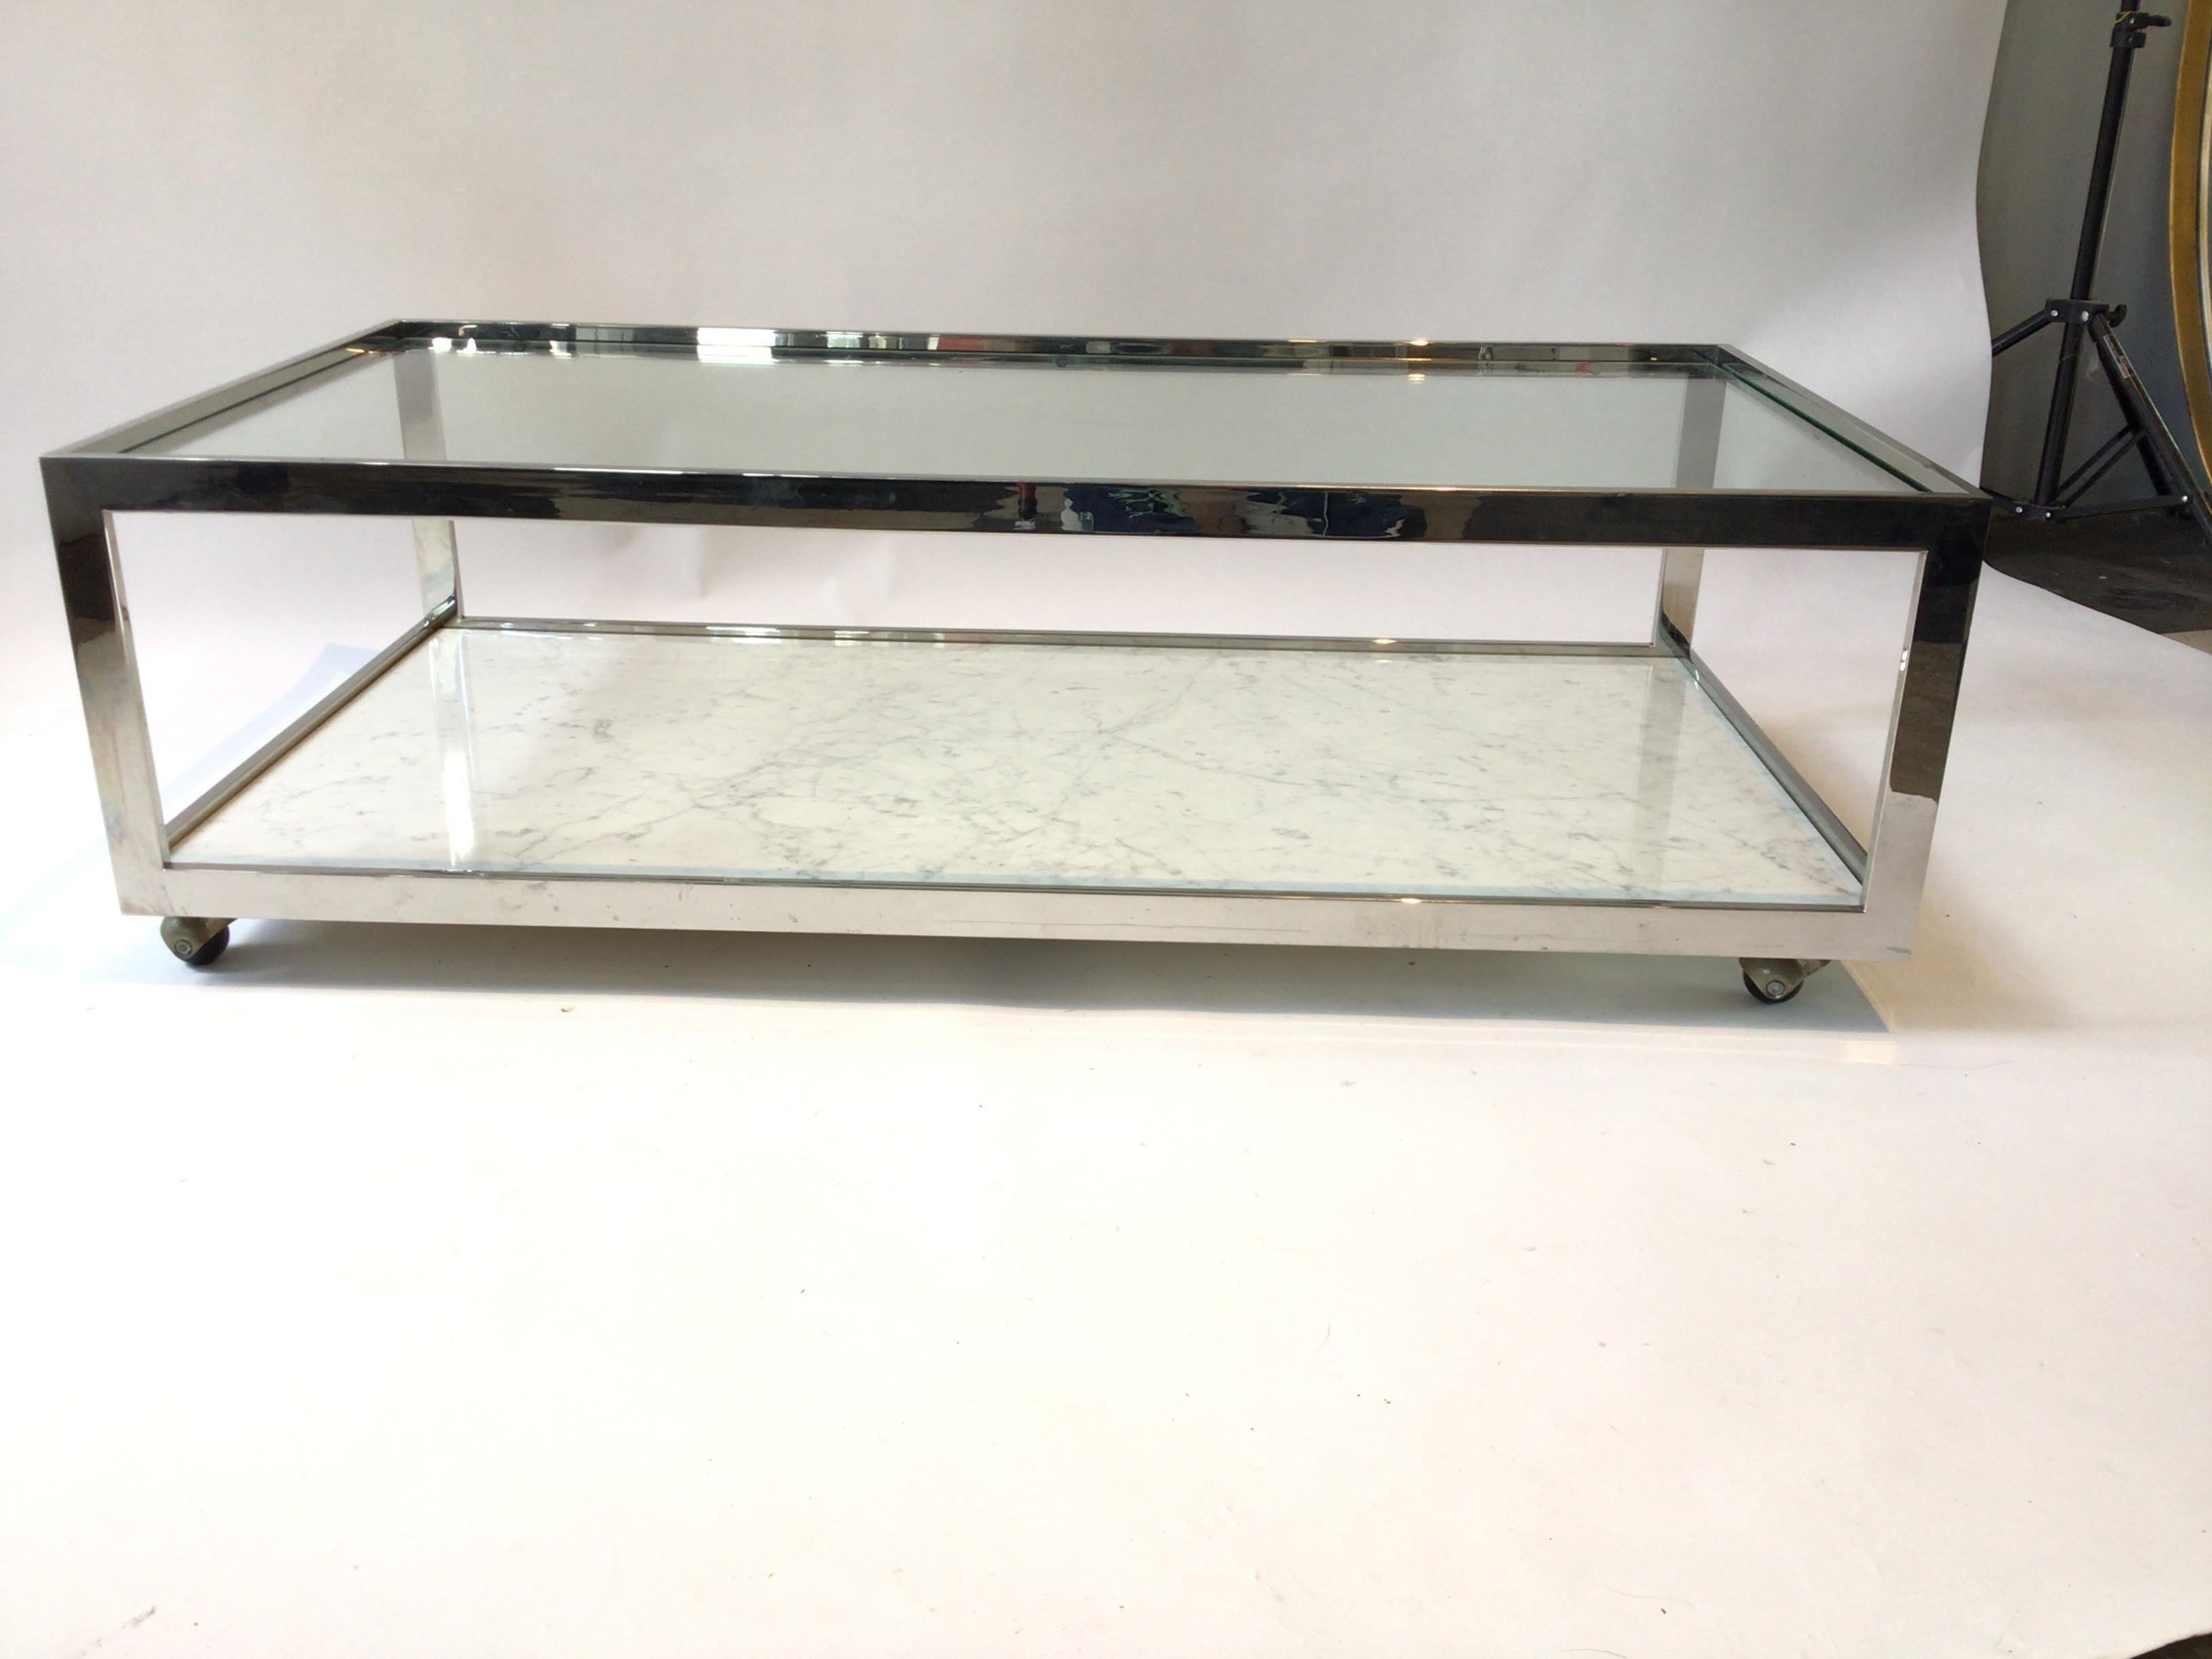 1970s Milo Baughman chrome, glass, and marble coffee table on wheels.